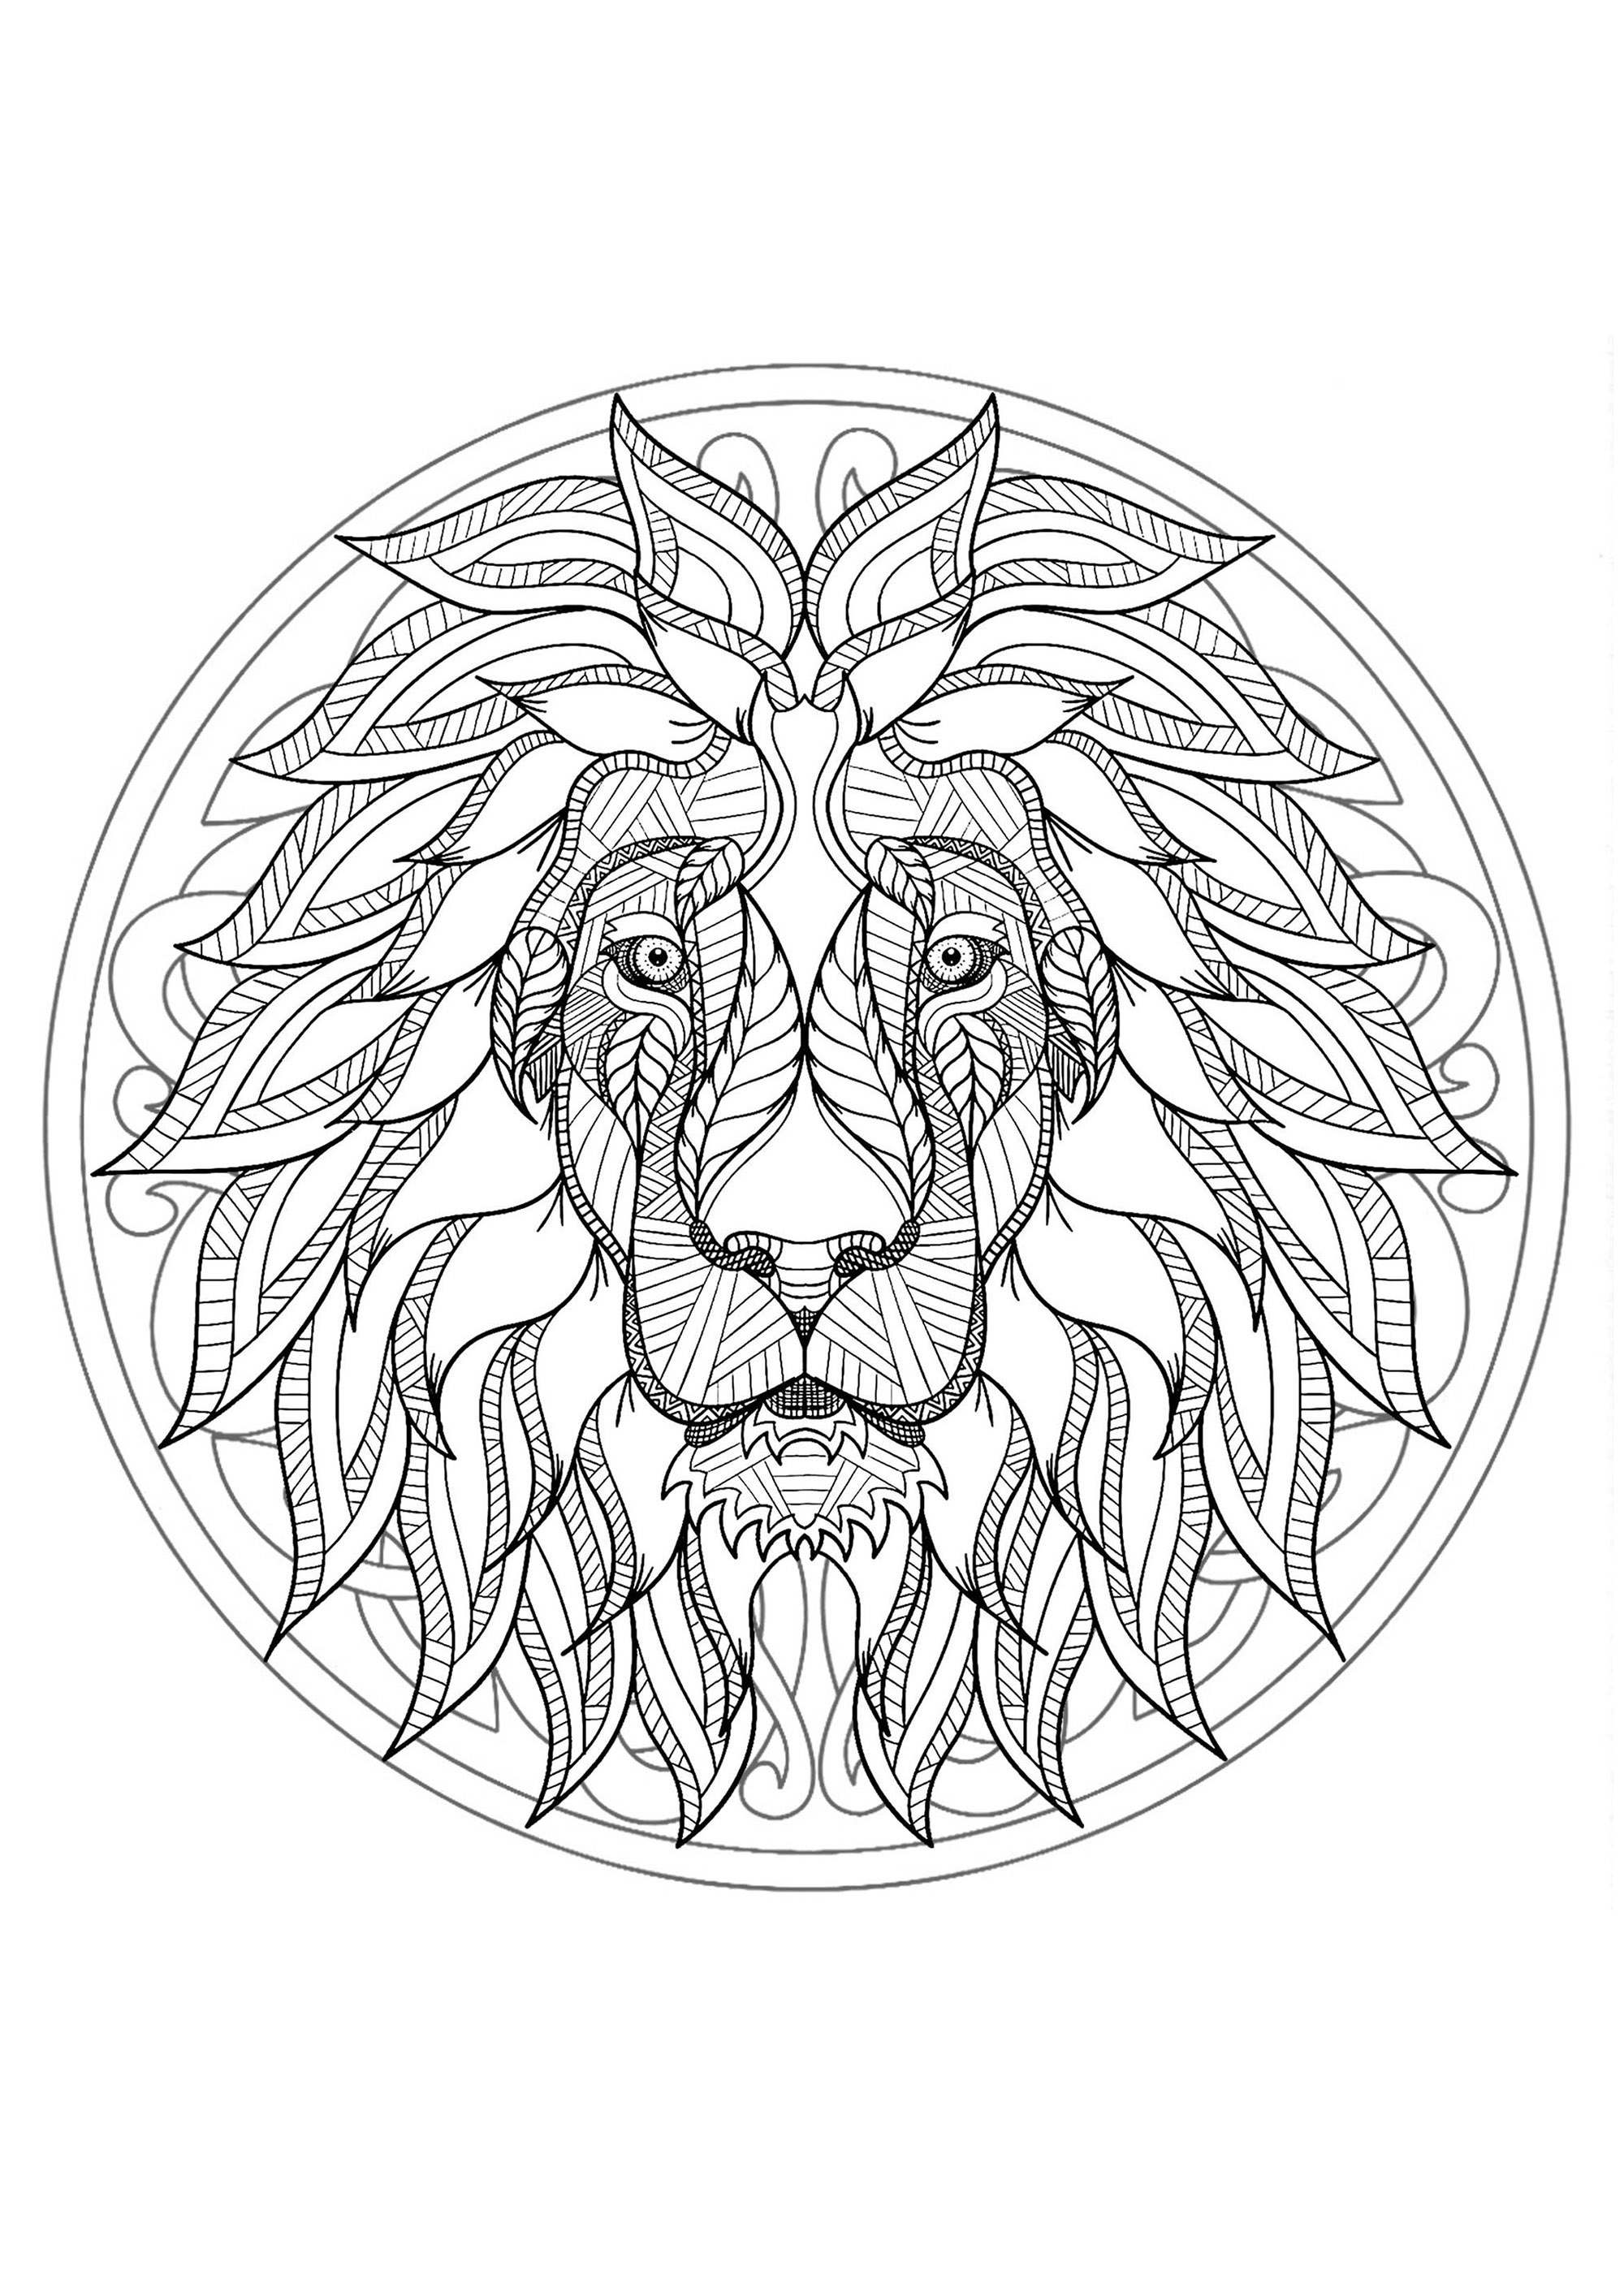 Coloring page with Lion head and beautiful Mandala in background